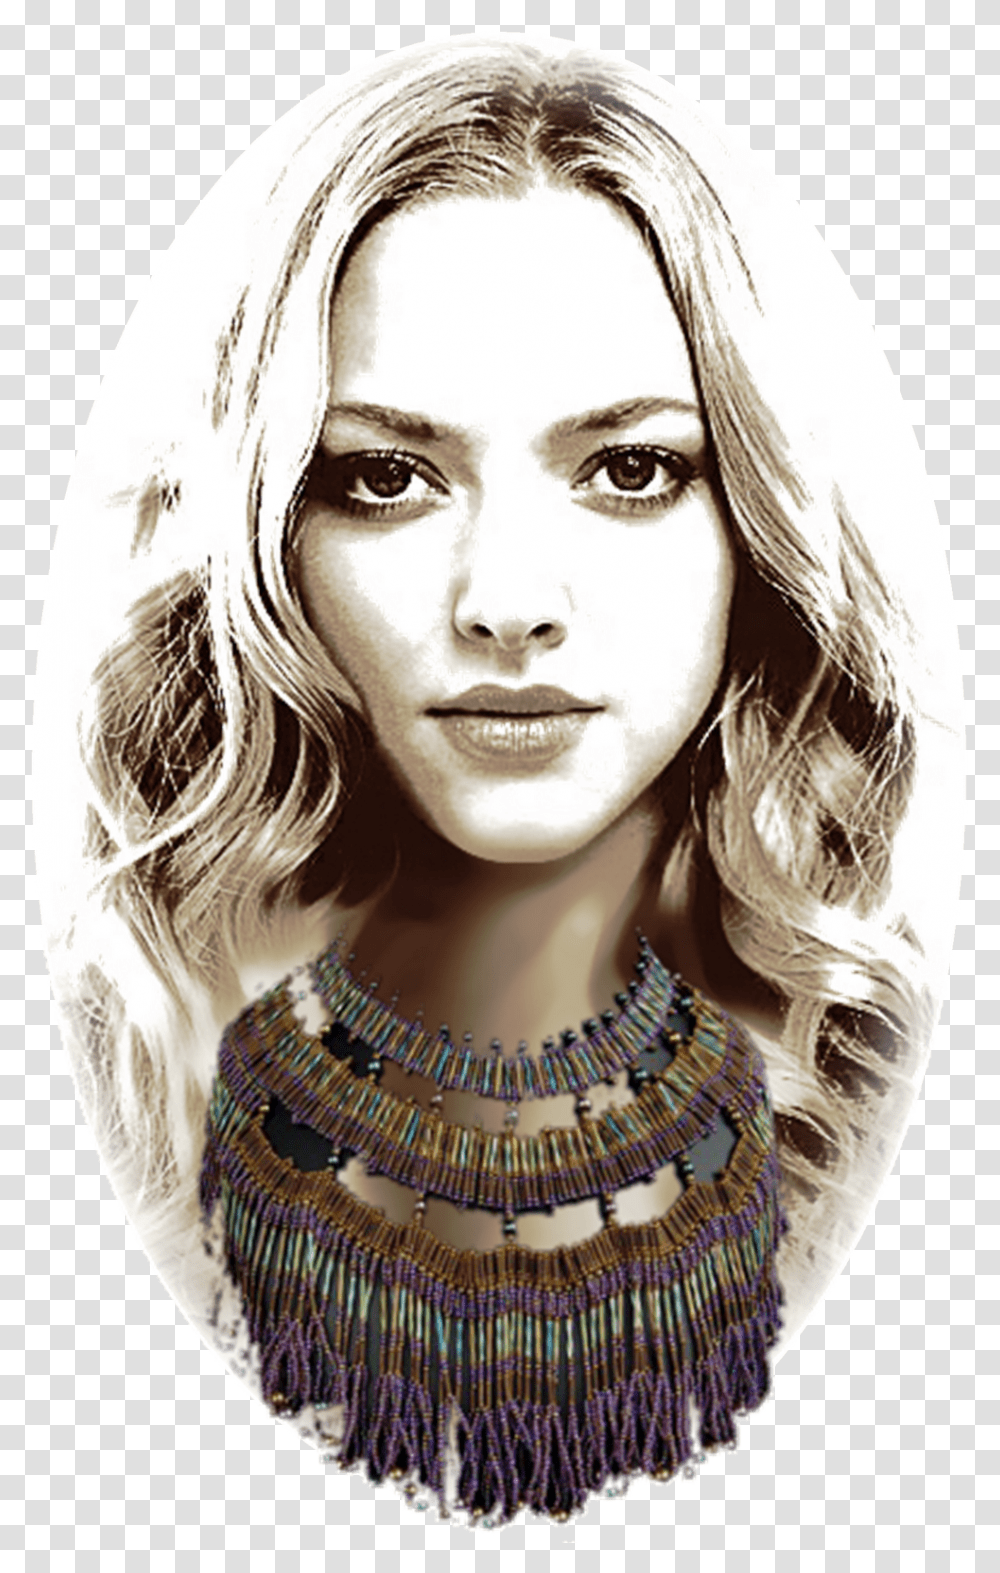 Amanda Seyfried Wallpaper Iphone, Person, Human, Face, Accessories Transparent Png